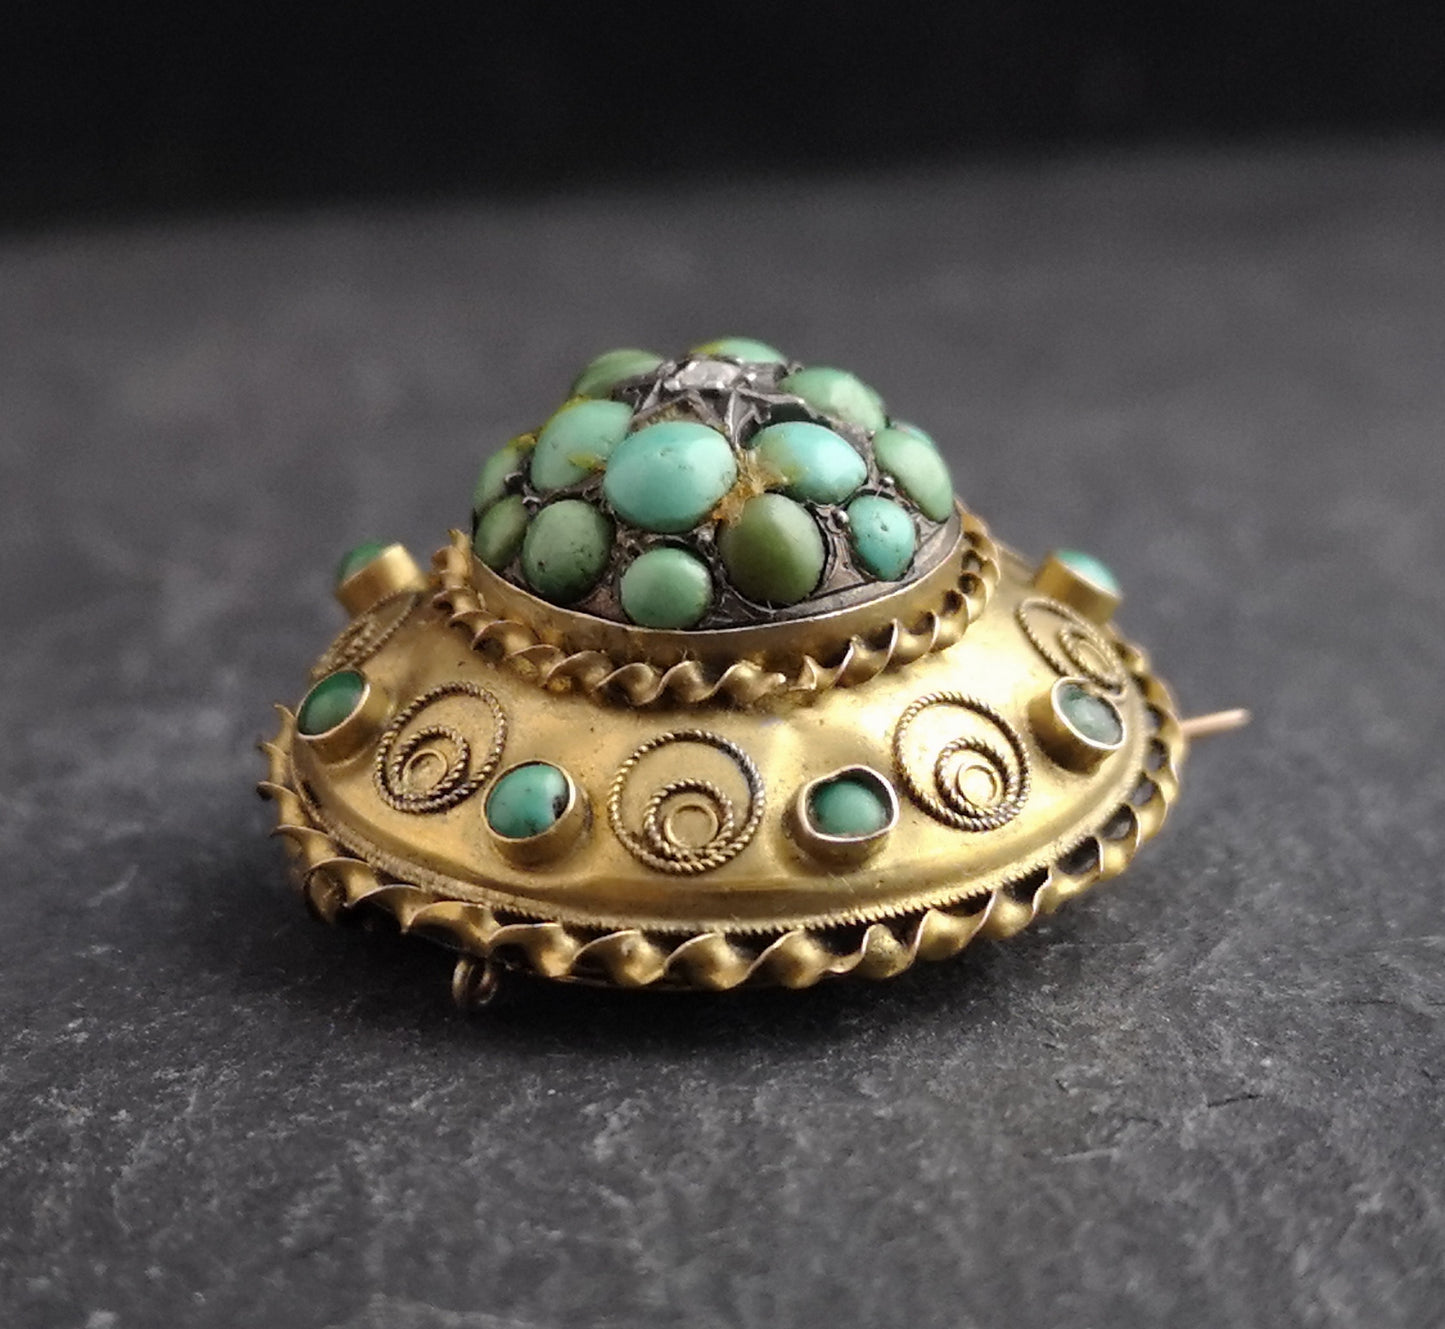 Antique turquoise and diamond locket brooch, Victorian 15ct